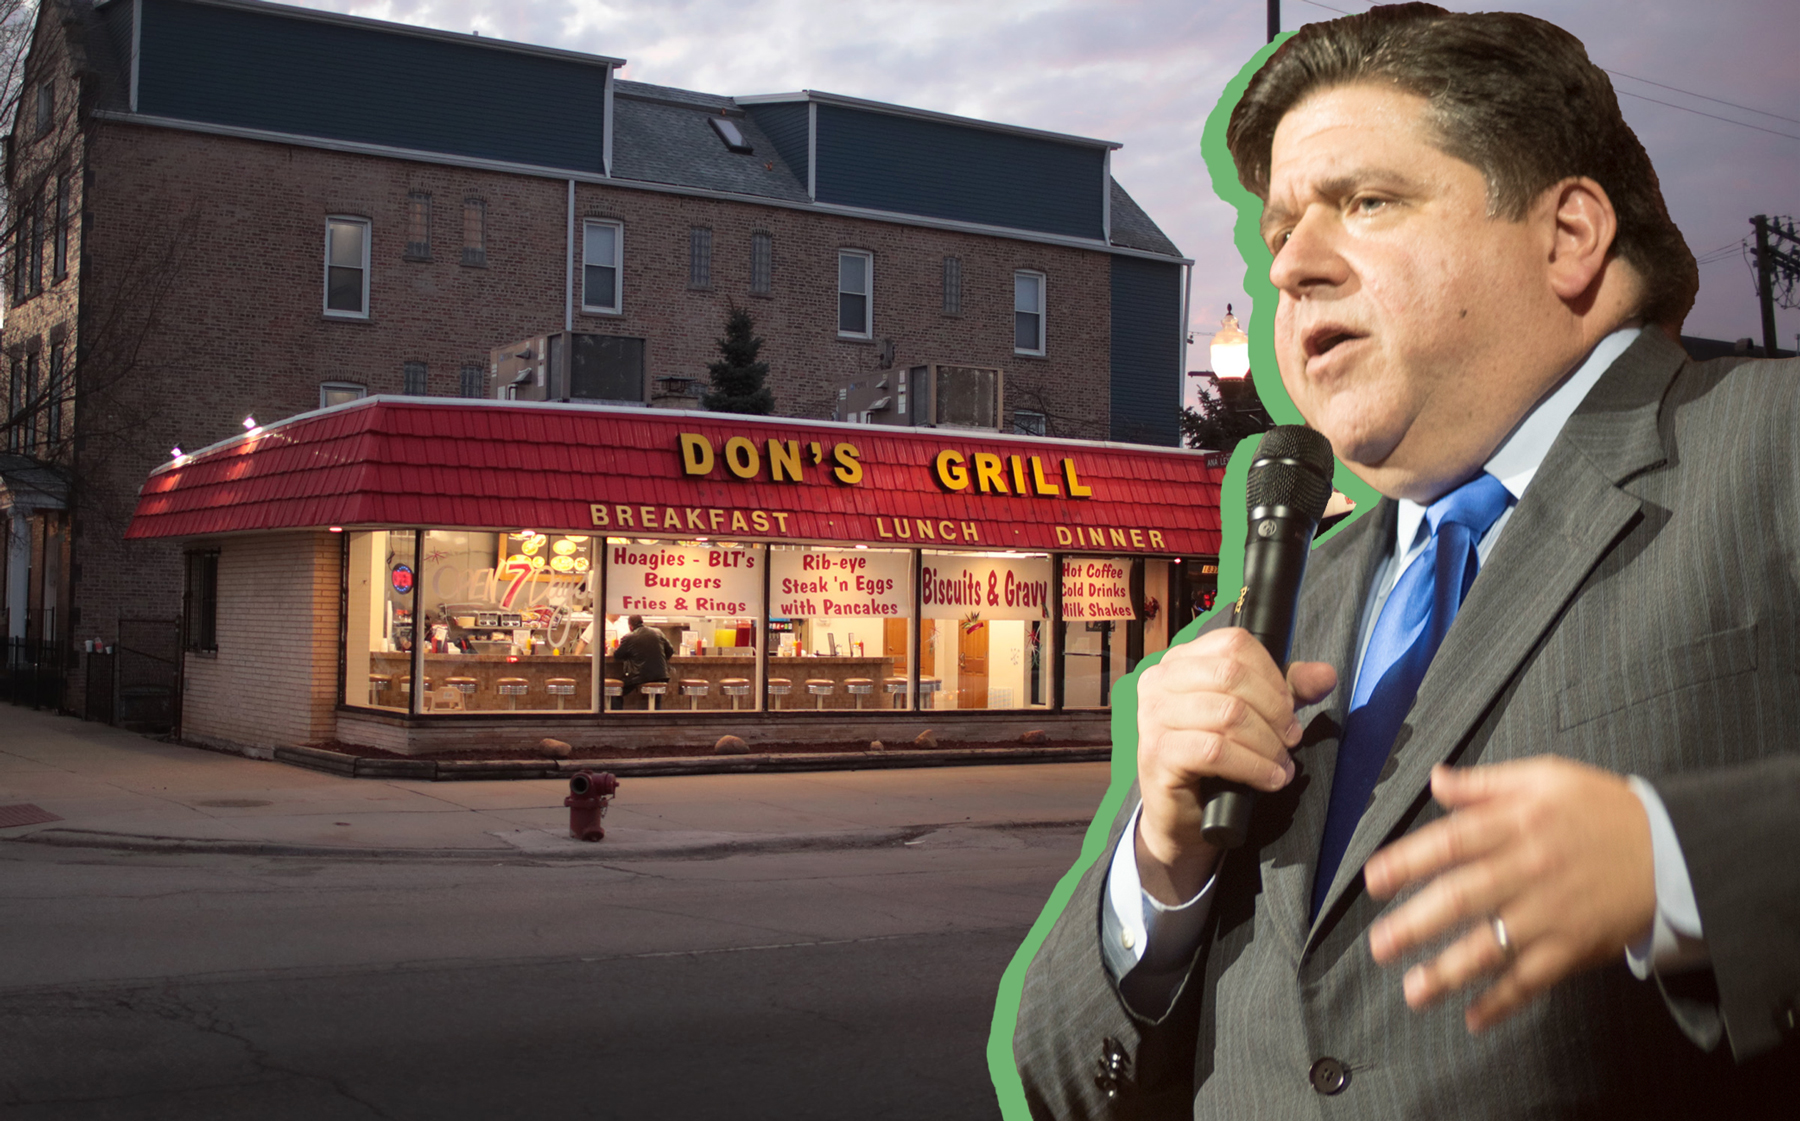 Illinois Gov. J.B. Pritzker and Don's Grill in the Pilsen neighborhood in Chicago (Credit: Scott Olson/Getty Images; Paul Natkin/Getty Images)